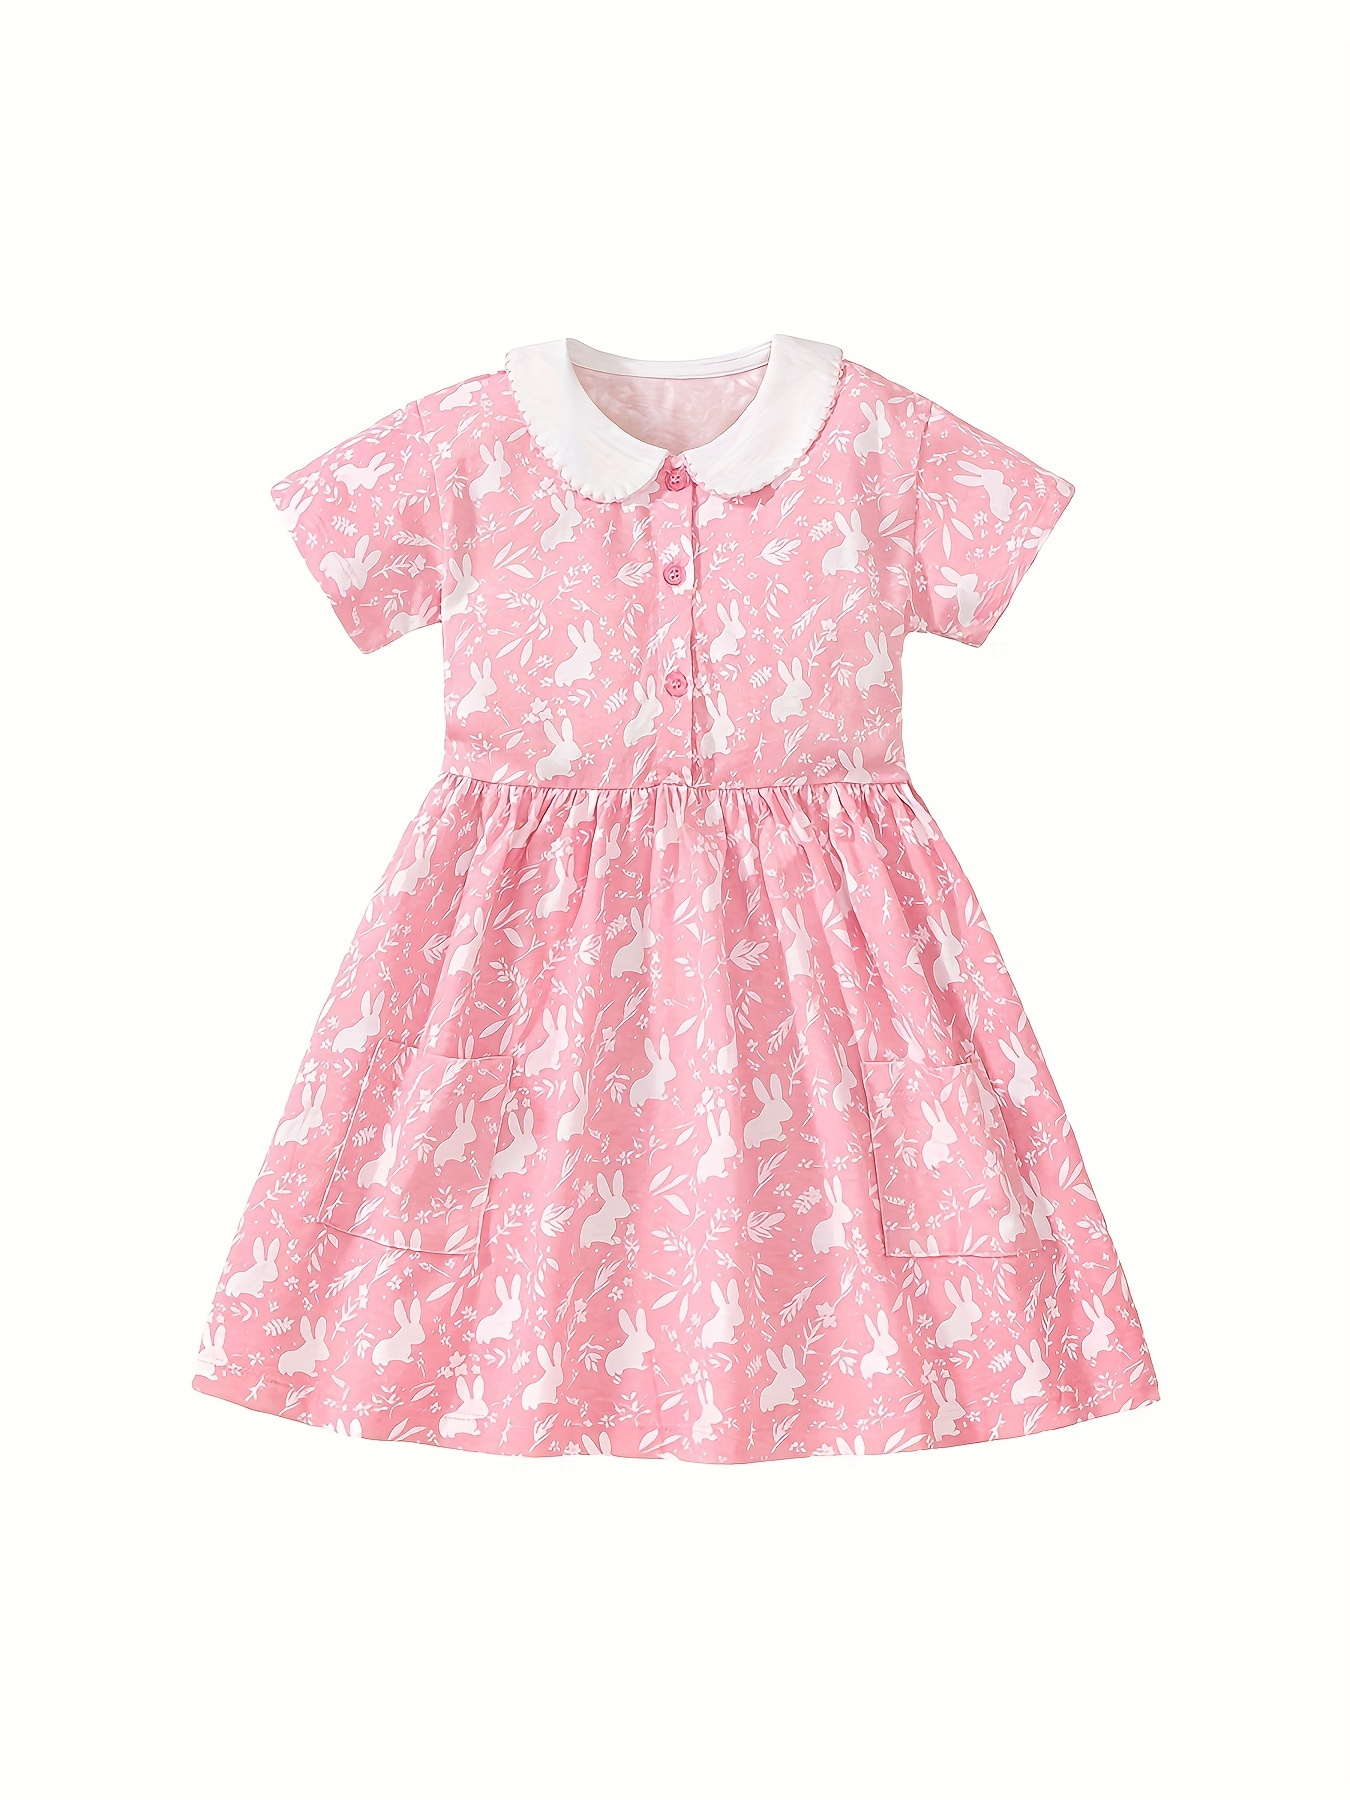 Cute Dress For Teens Girl Two Piece Set Bunny Prints Casual Cotton Dresses  For Spring Autumn